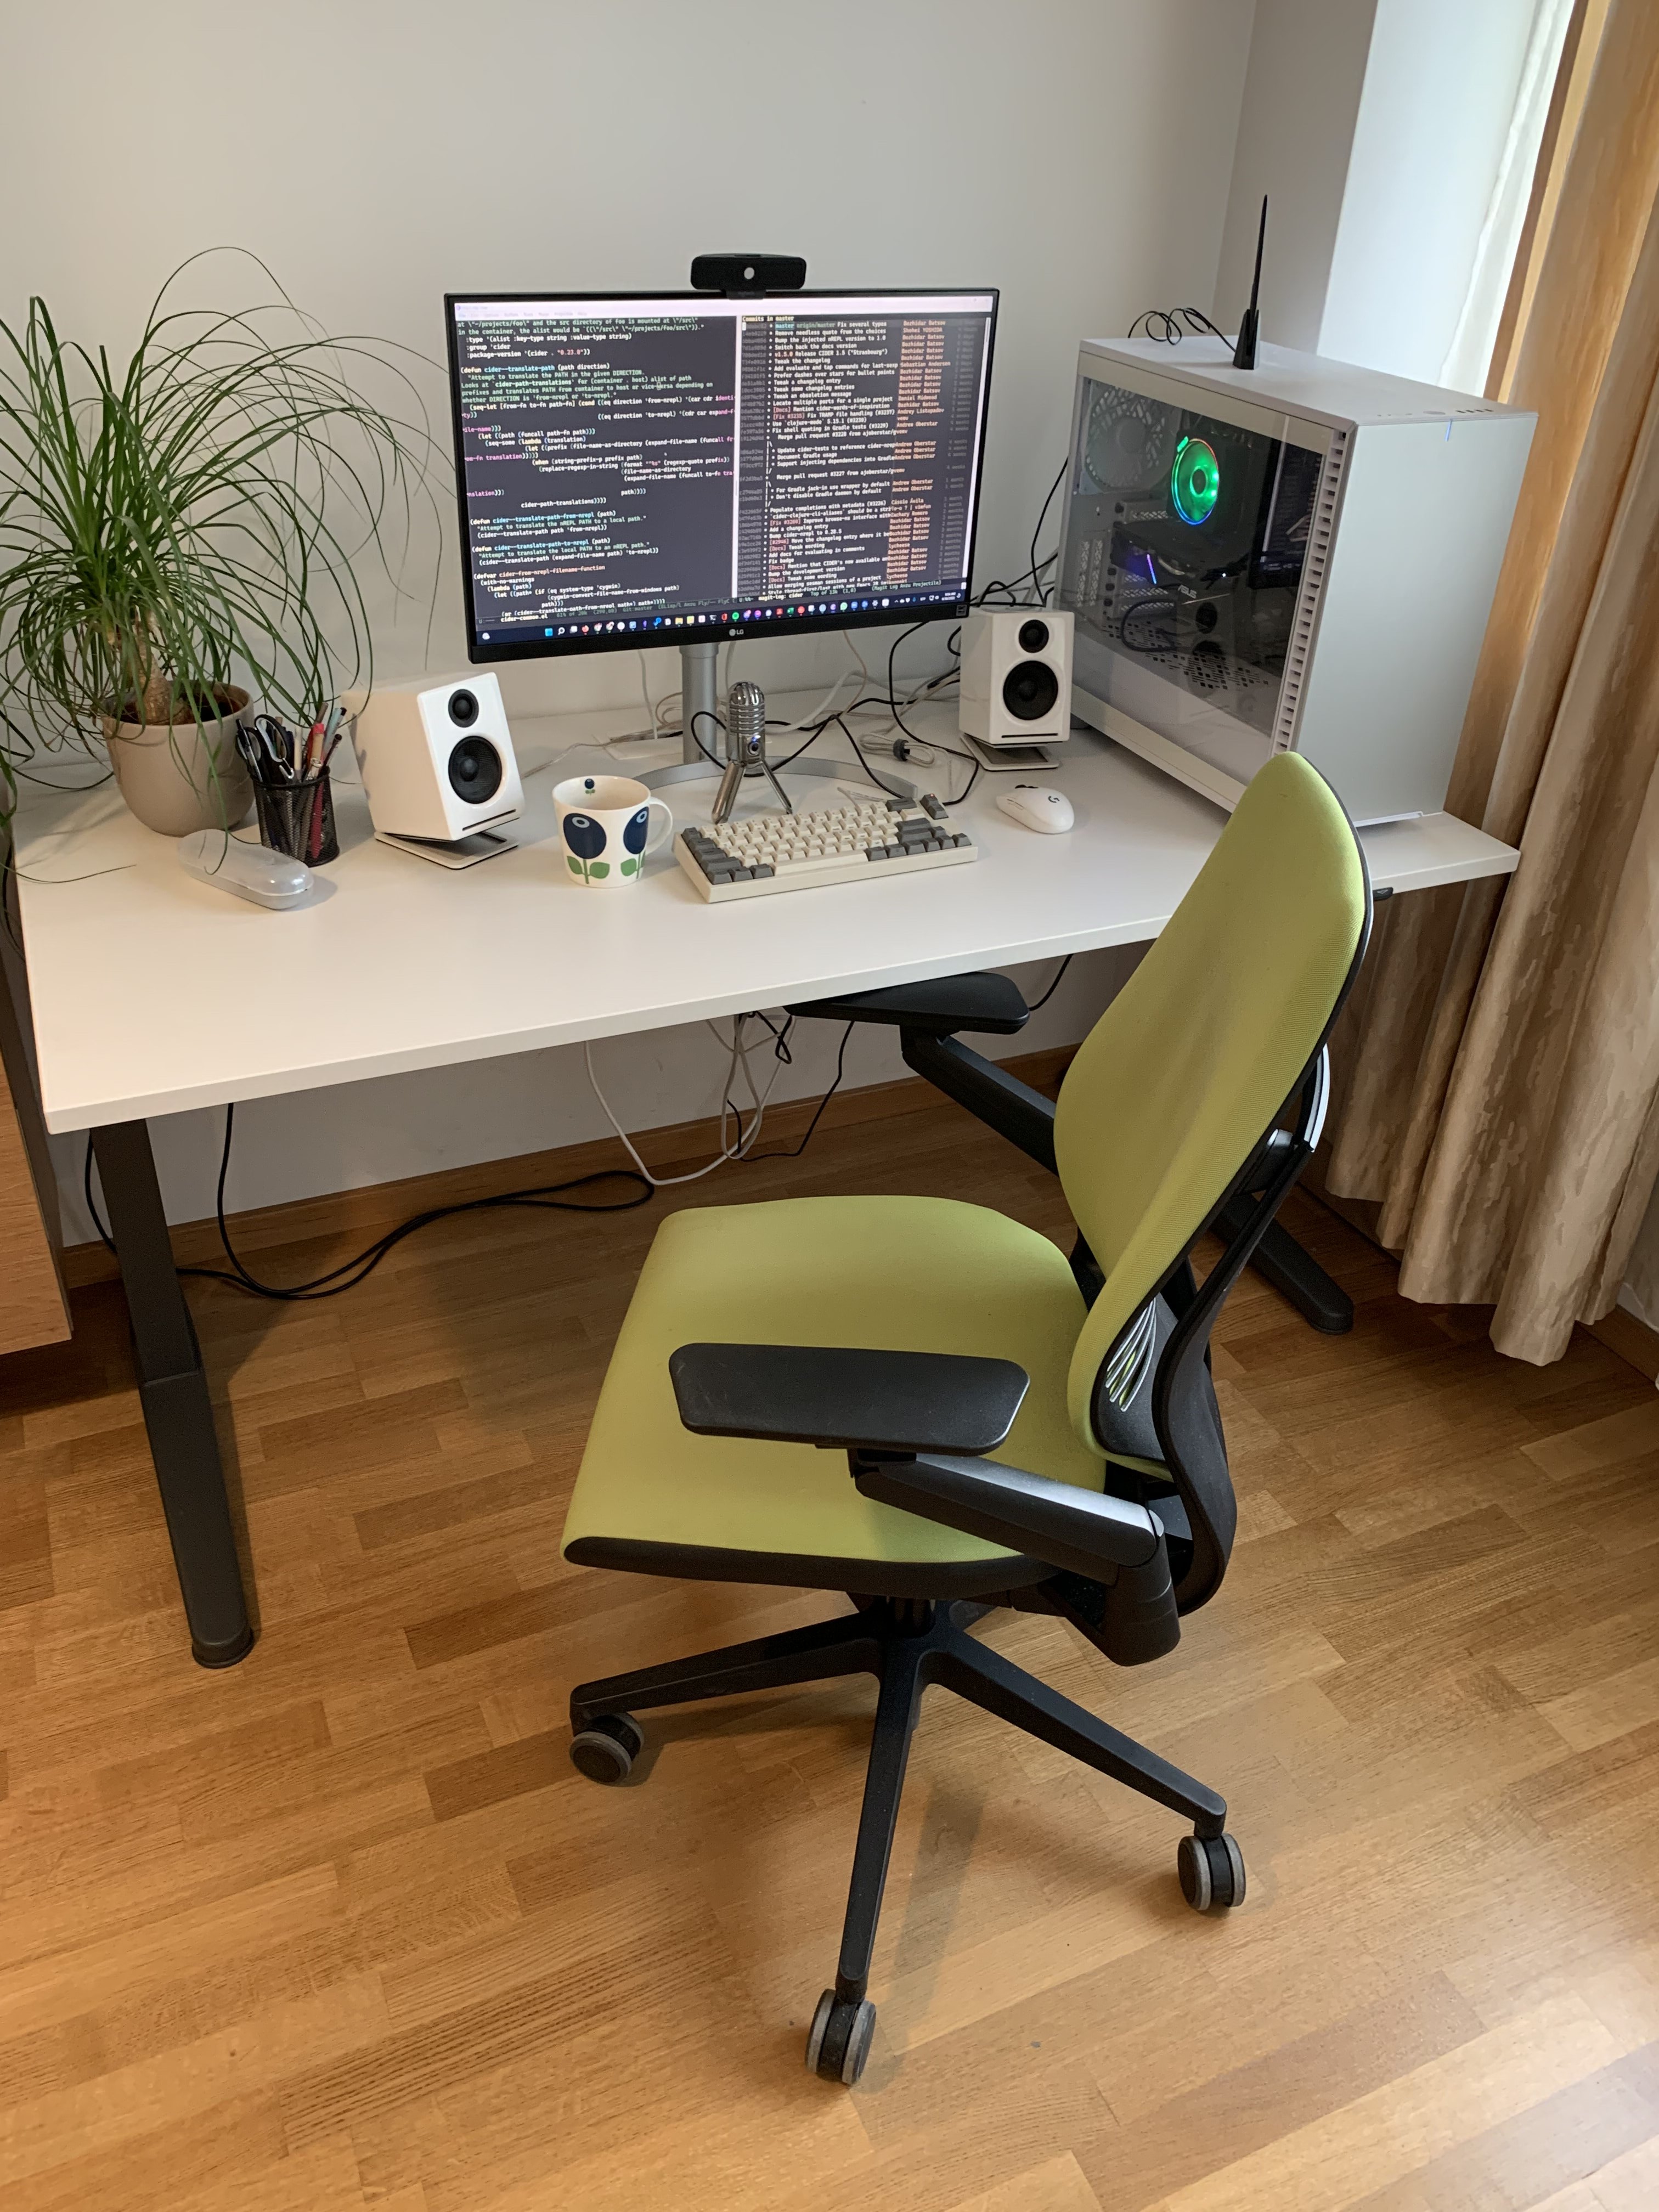 The whole desk and chair from an angle